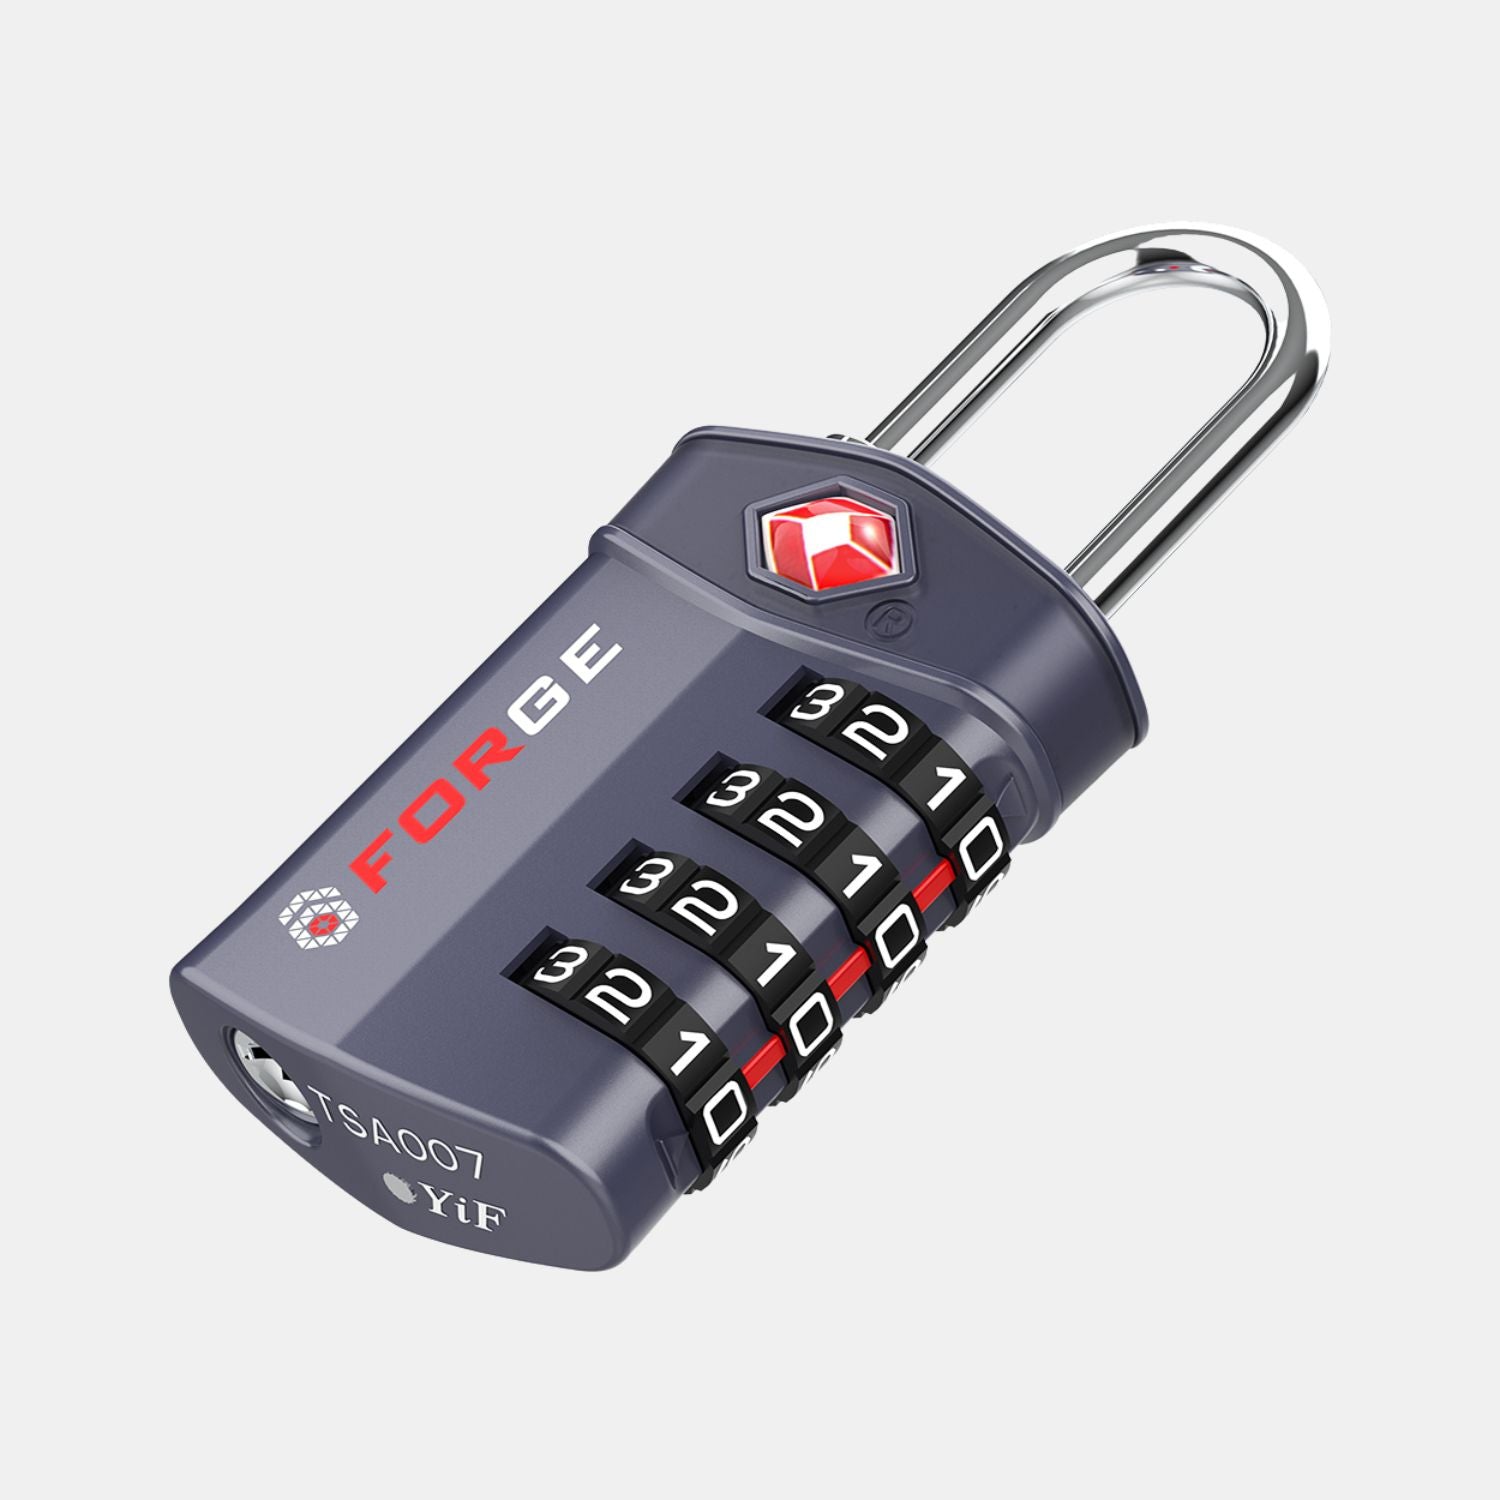 TSA Approved 4-Digit Combination Locks for Luggage and Suitcases. Open Alert, Alloy Body, Grey 4 Locks